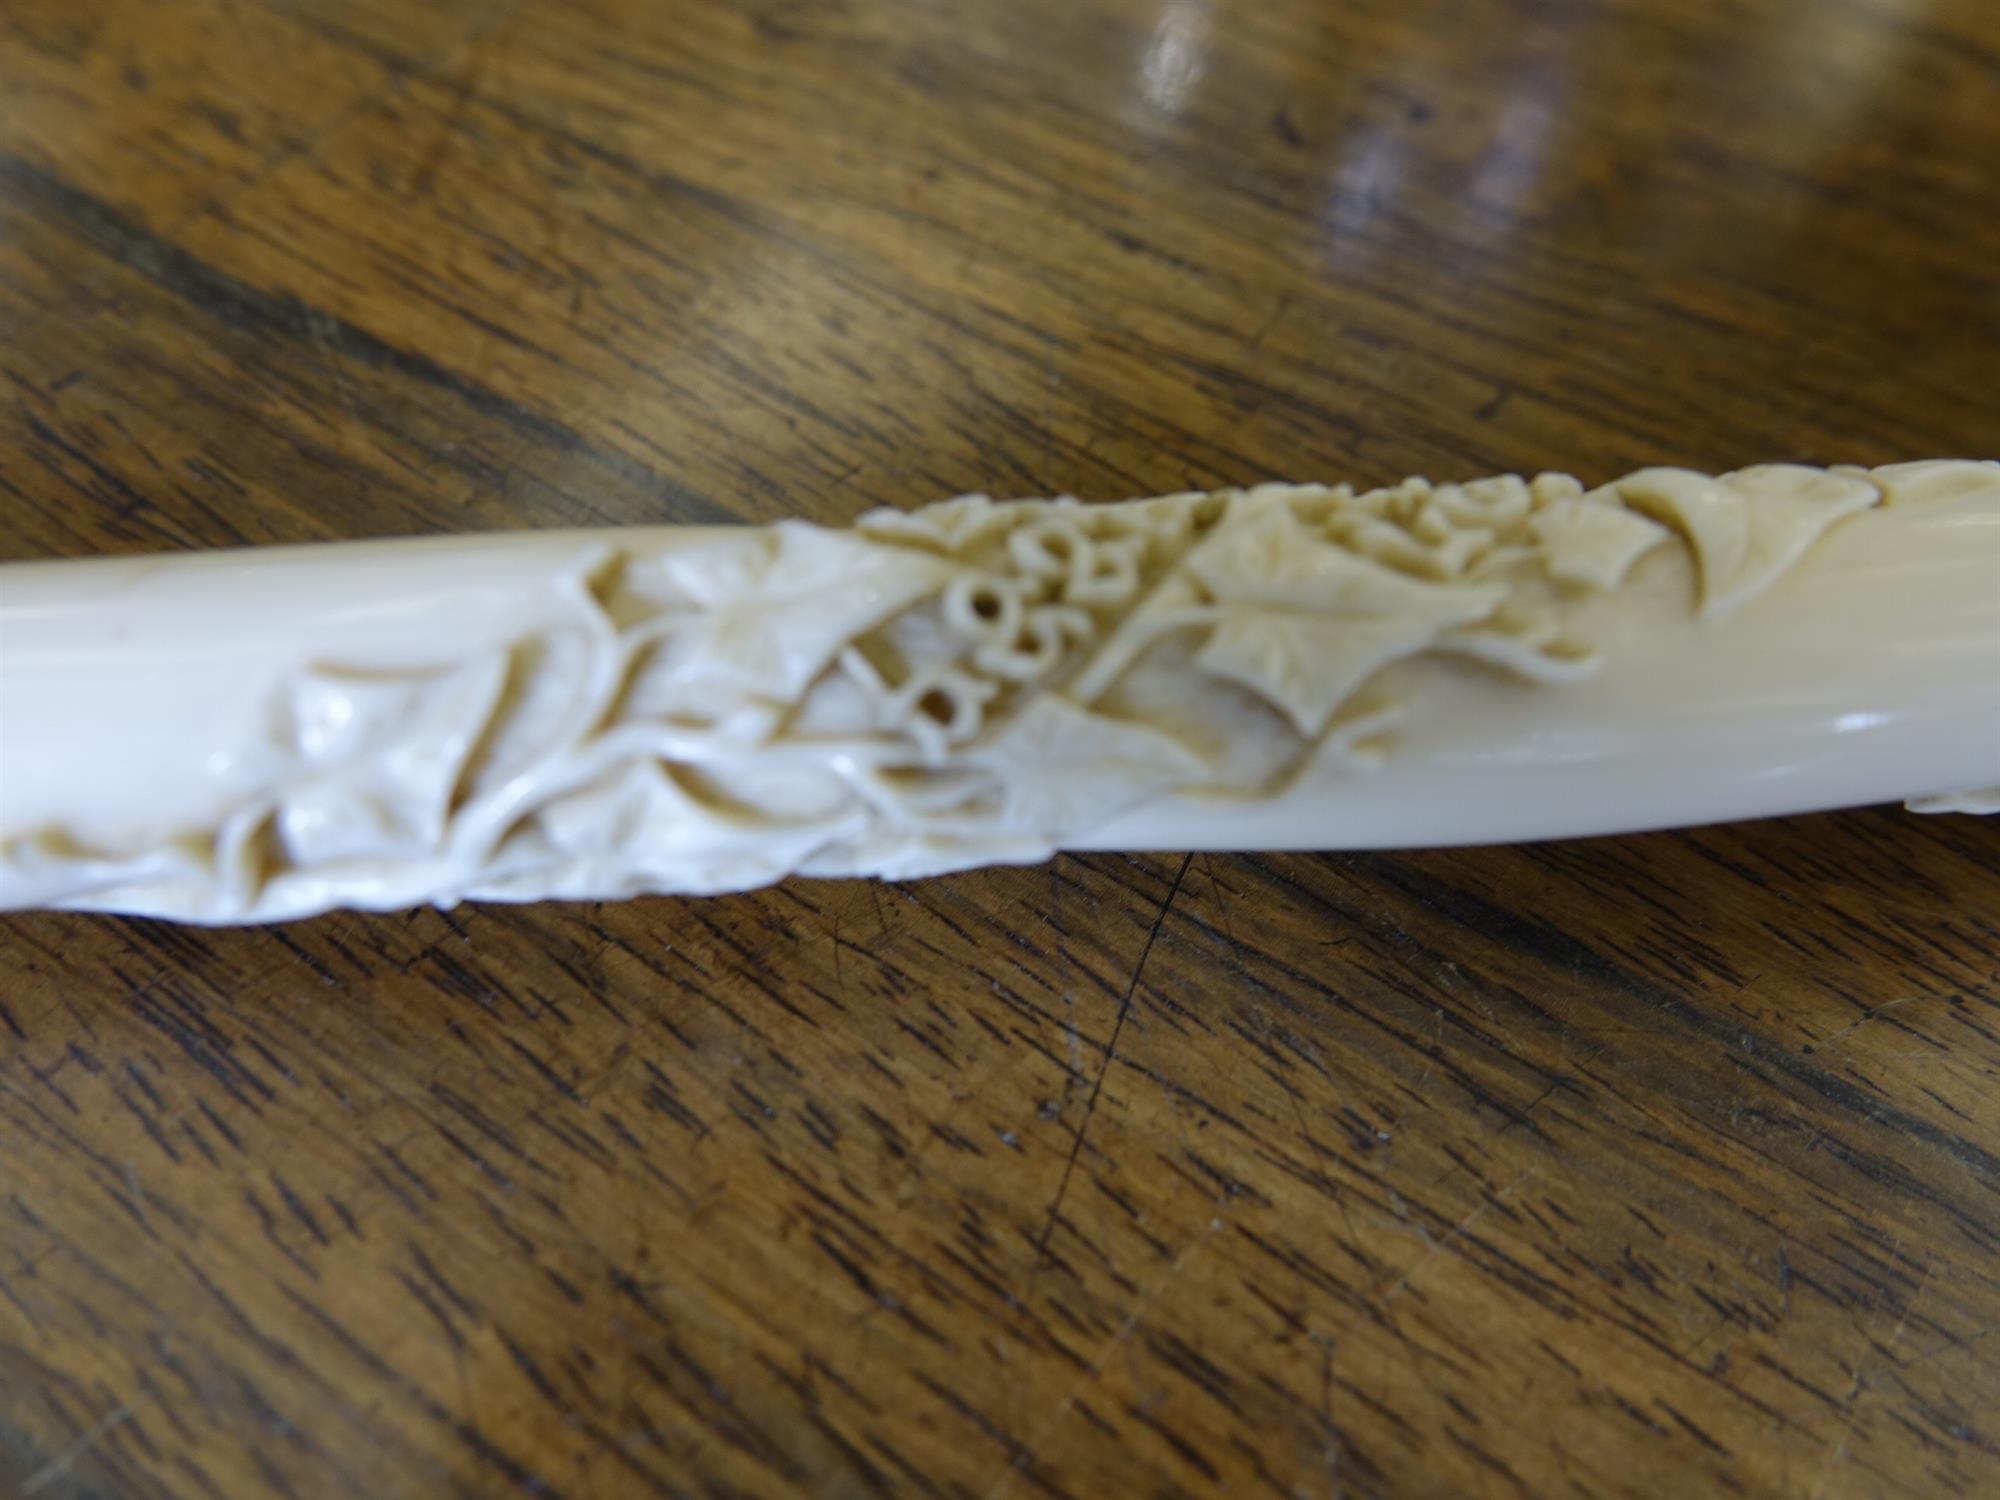 *A VICTORIAN UMBRELLA WITH IVORY CARVED HANDLE, the handle carved with vine leaves and - Image 5 of 10